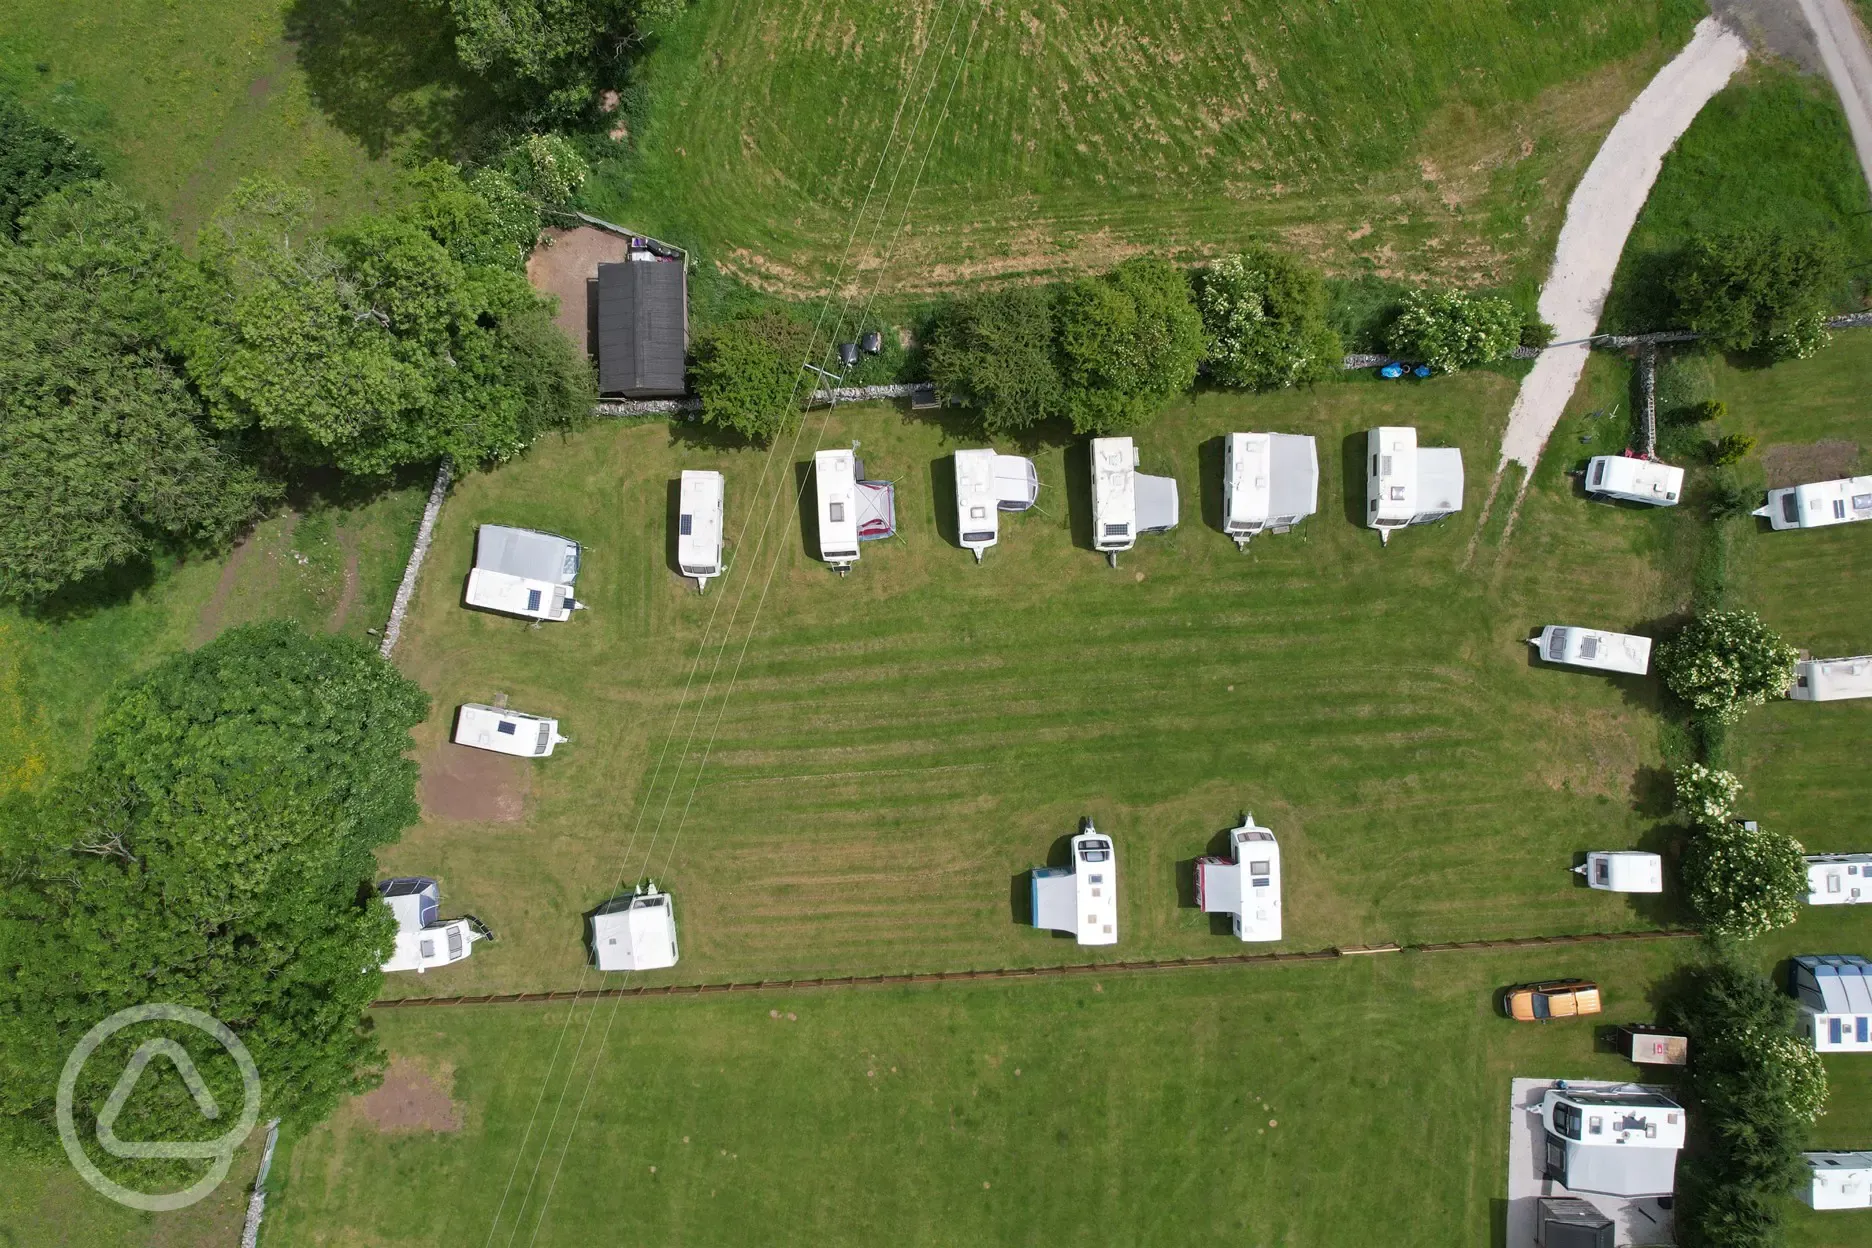 Aerial view of touring field